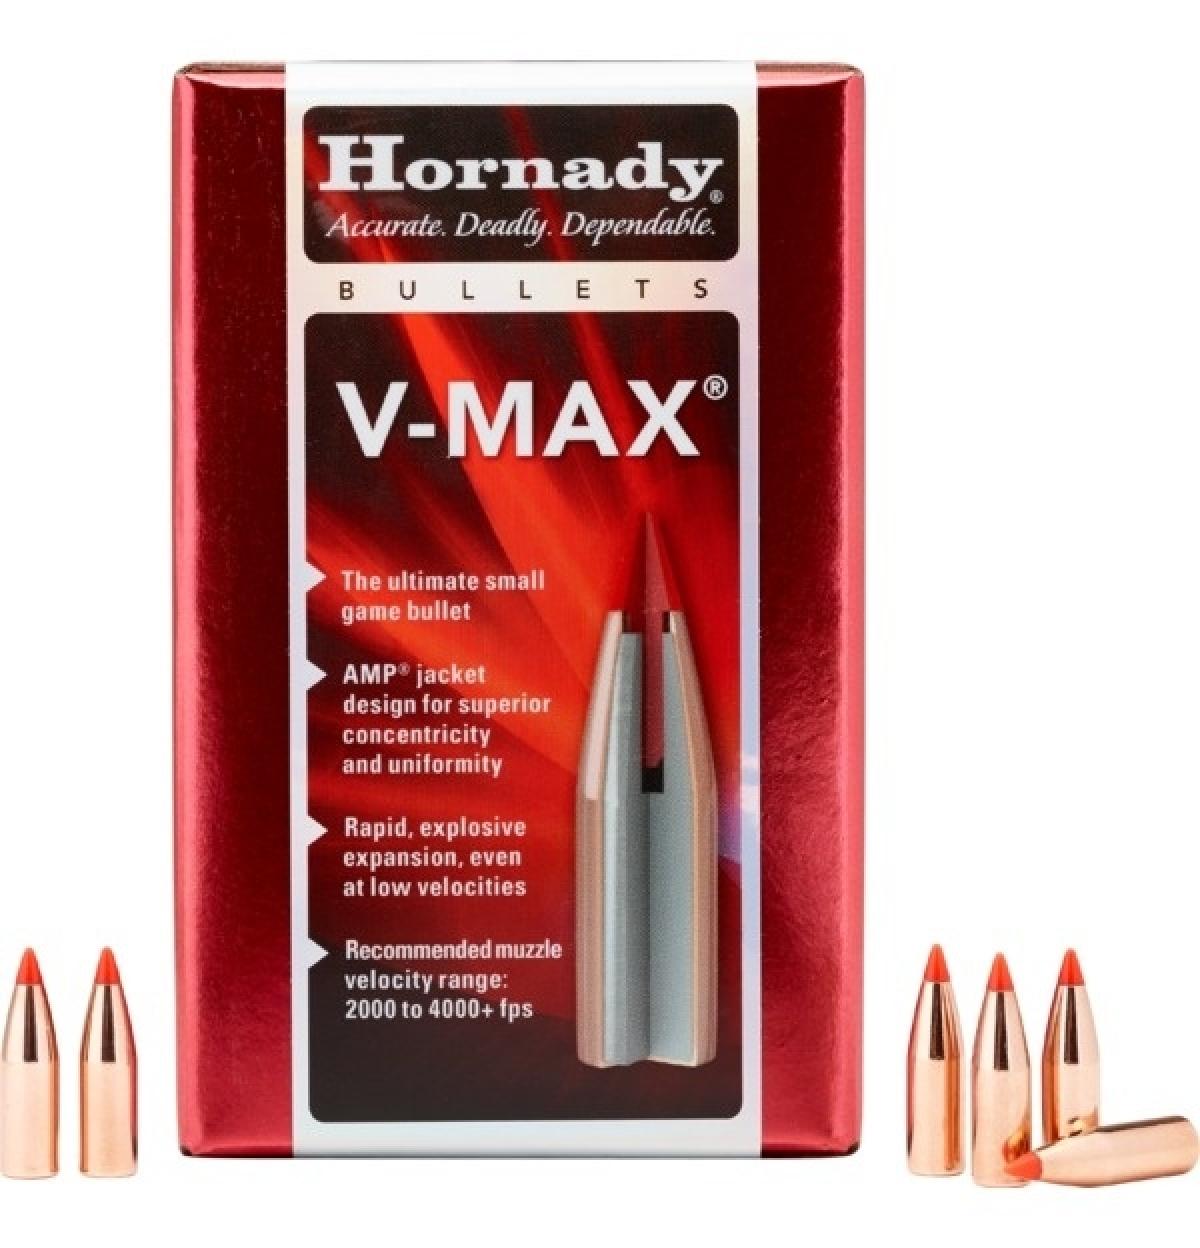 Hornady 22 Cal .224 55 gr V-MAX Bullets with cannelure